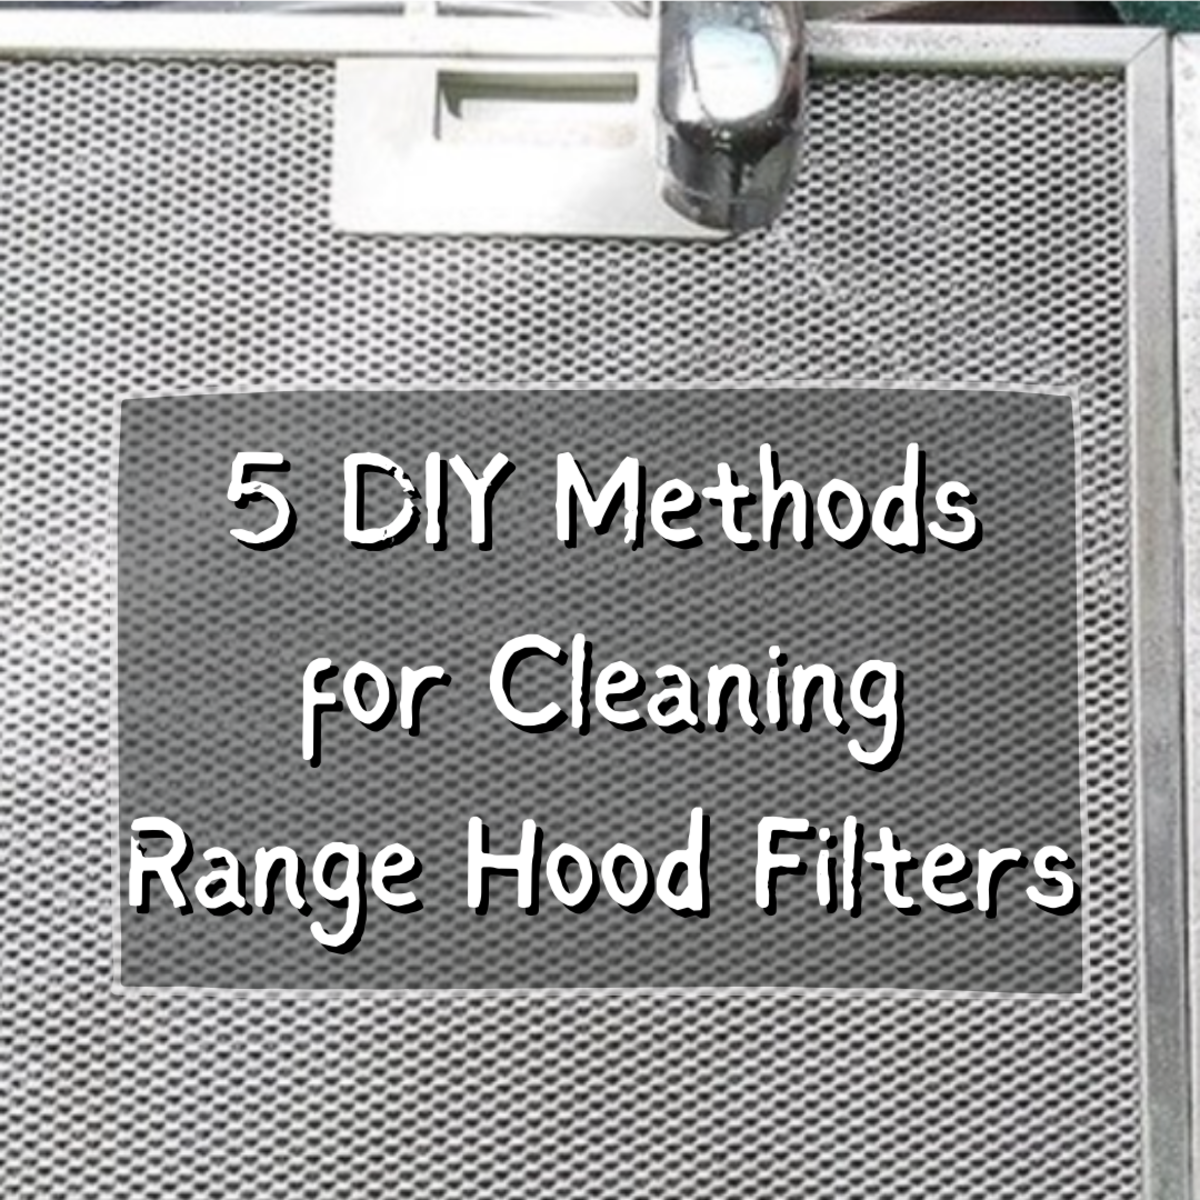 Learn how to clean a metal mesh cooker hood filter. These article provides 5 solid DIY methods for getting the job done.